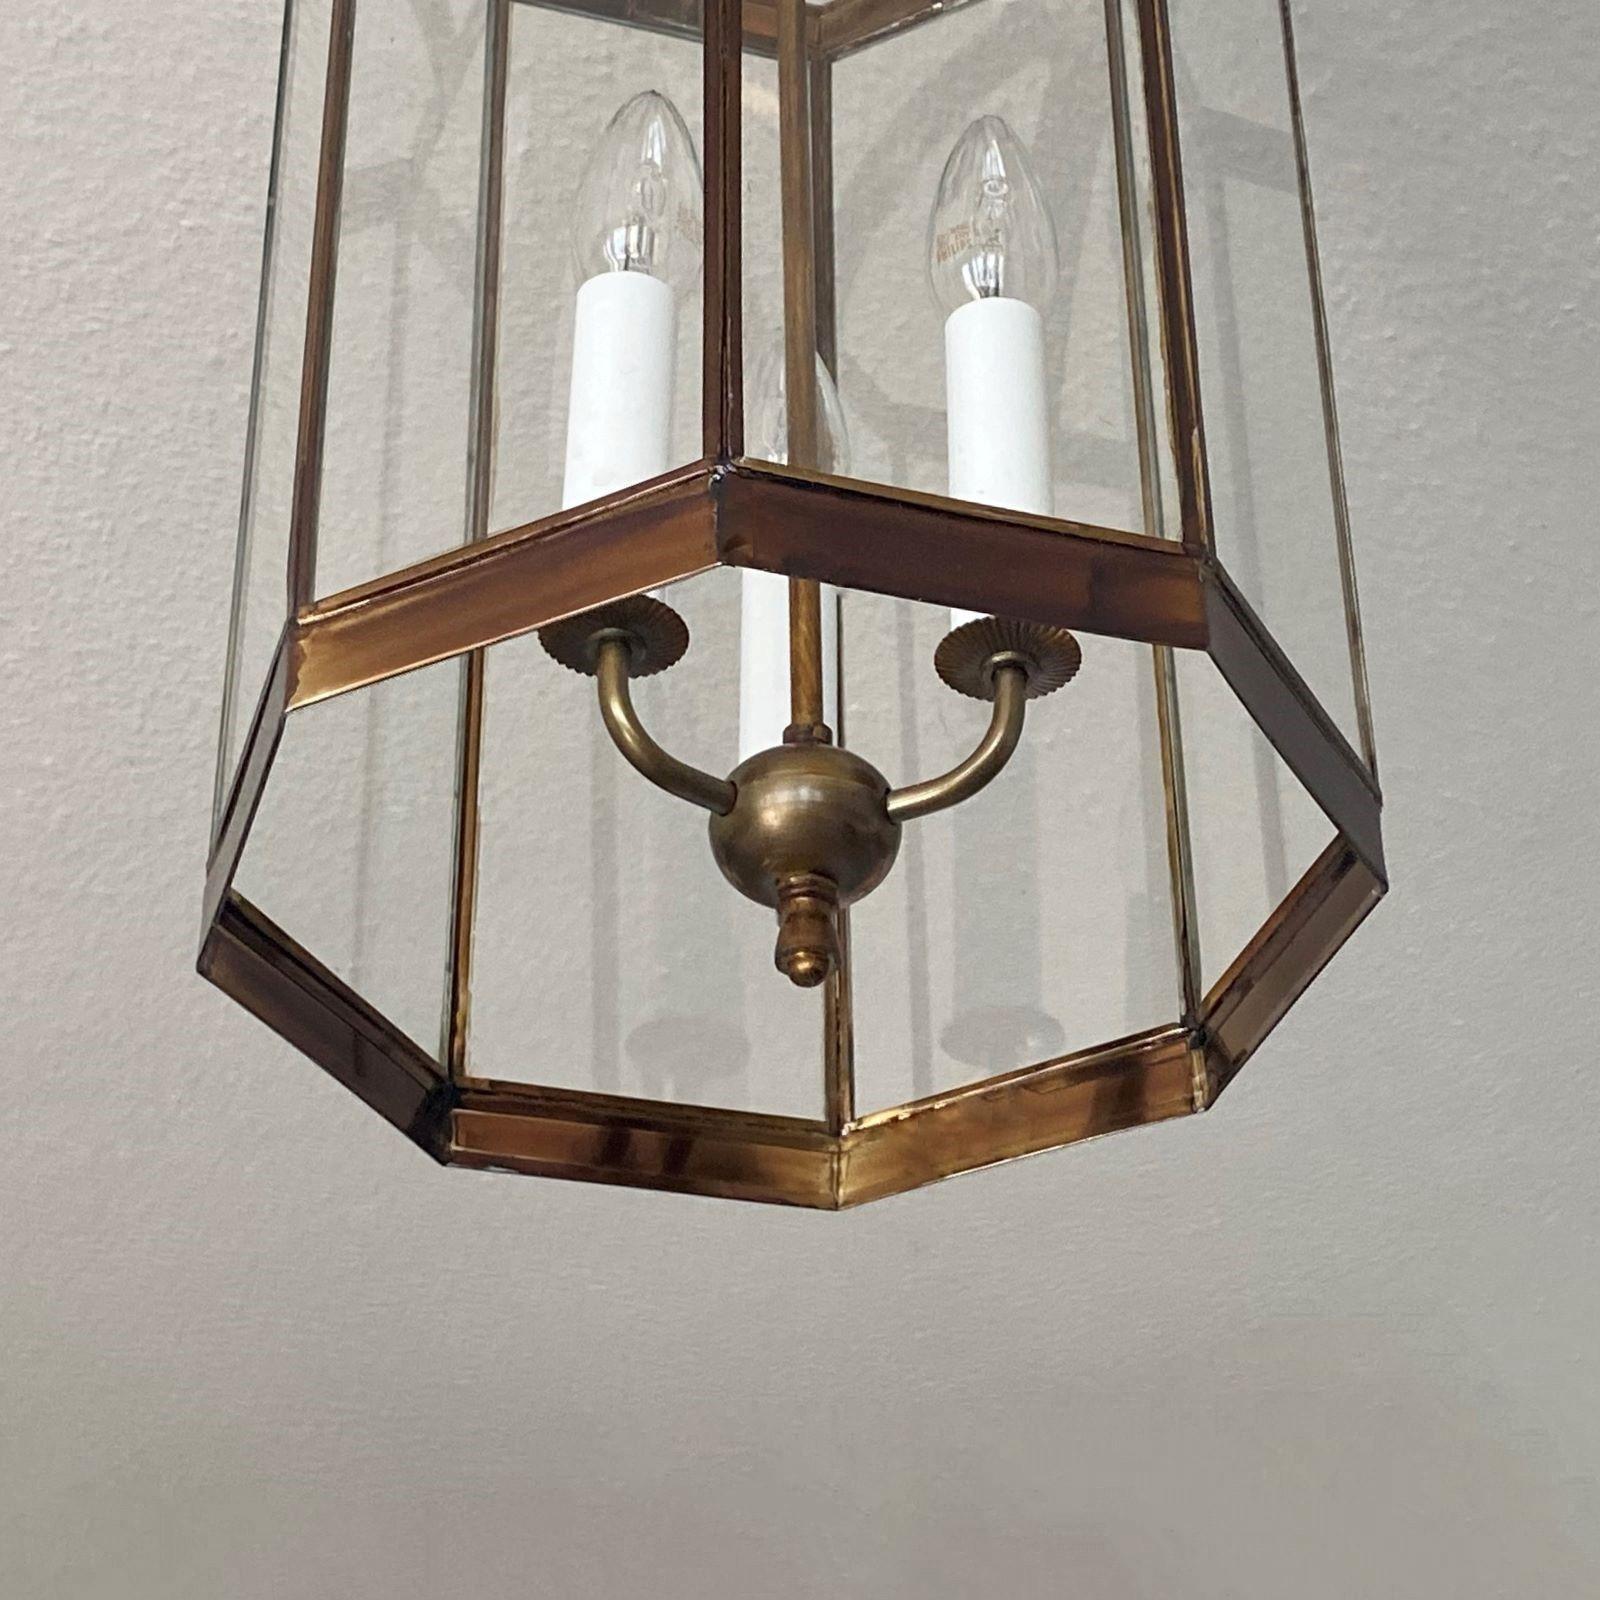 Mid-20th Century French Arte Deco Patinated Brass Clear Glass Eight-Sided Lantern, 1930s For Sale